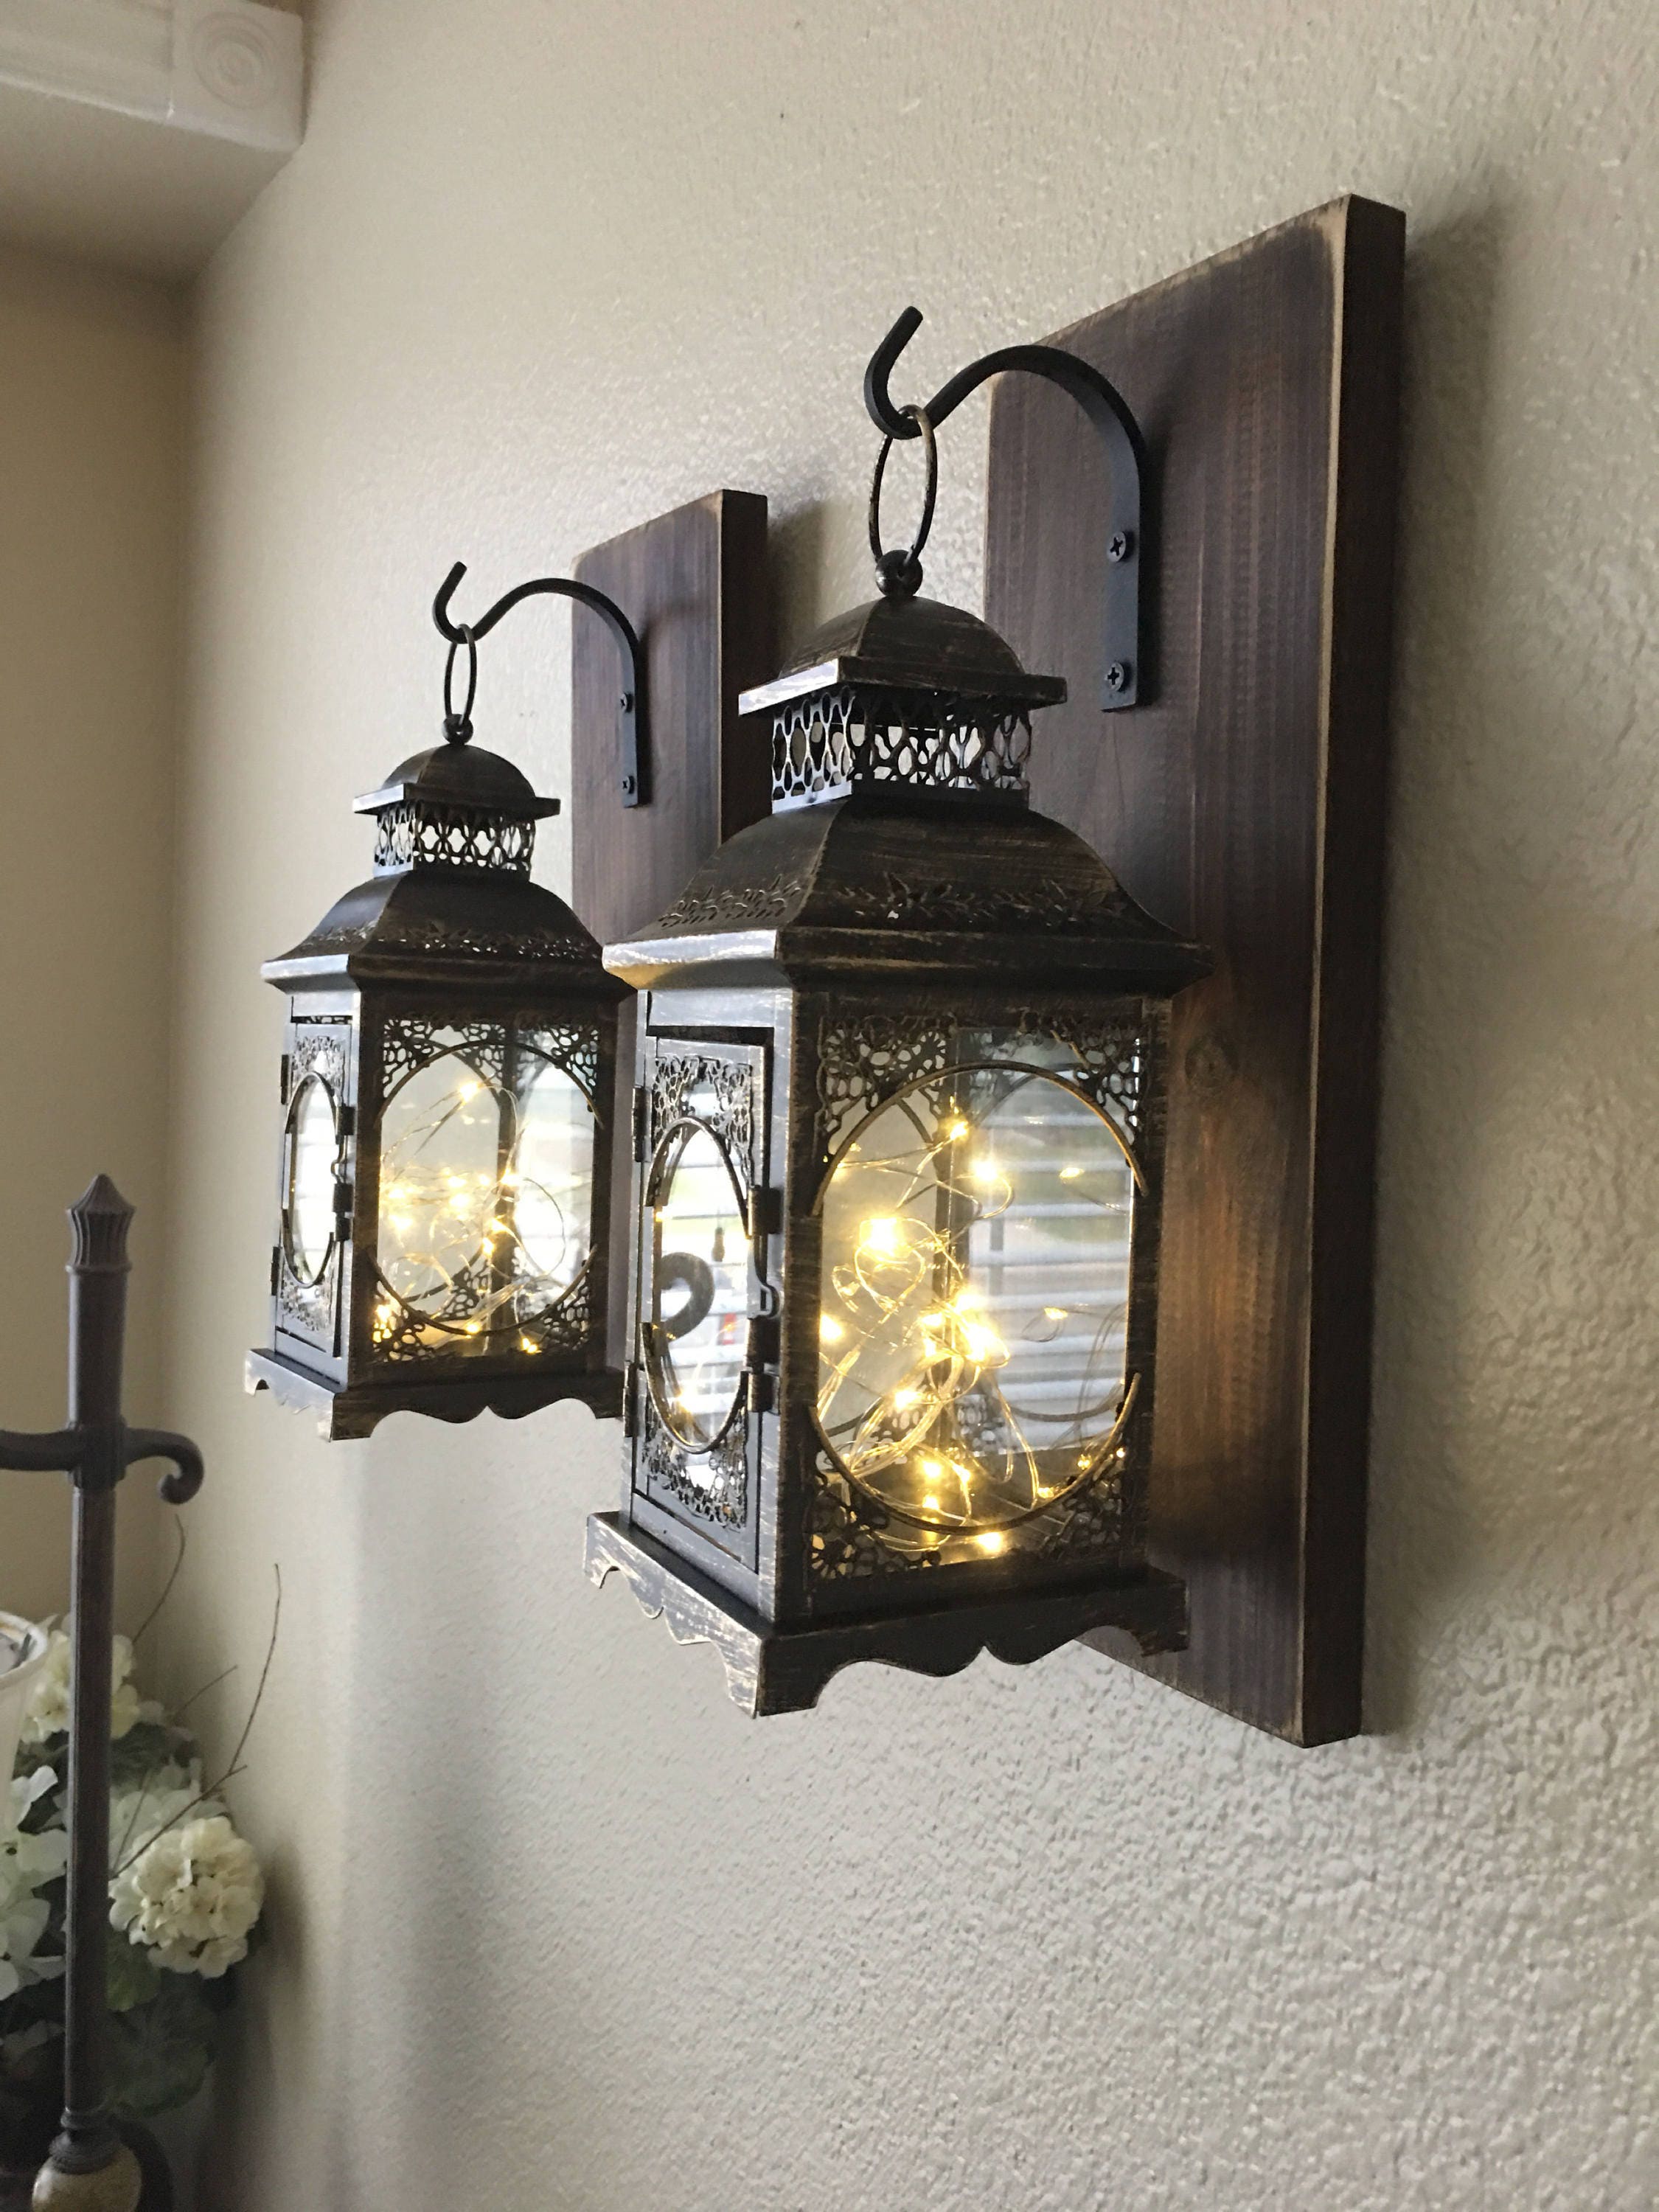 Details about   Rustic Wall Decor-Wall Sconce-Farmhouse Wall Decor Mounted Hanging Metal Lantern 